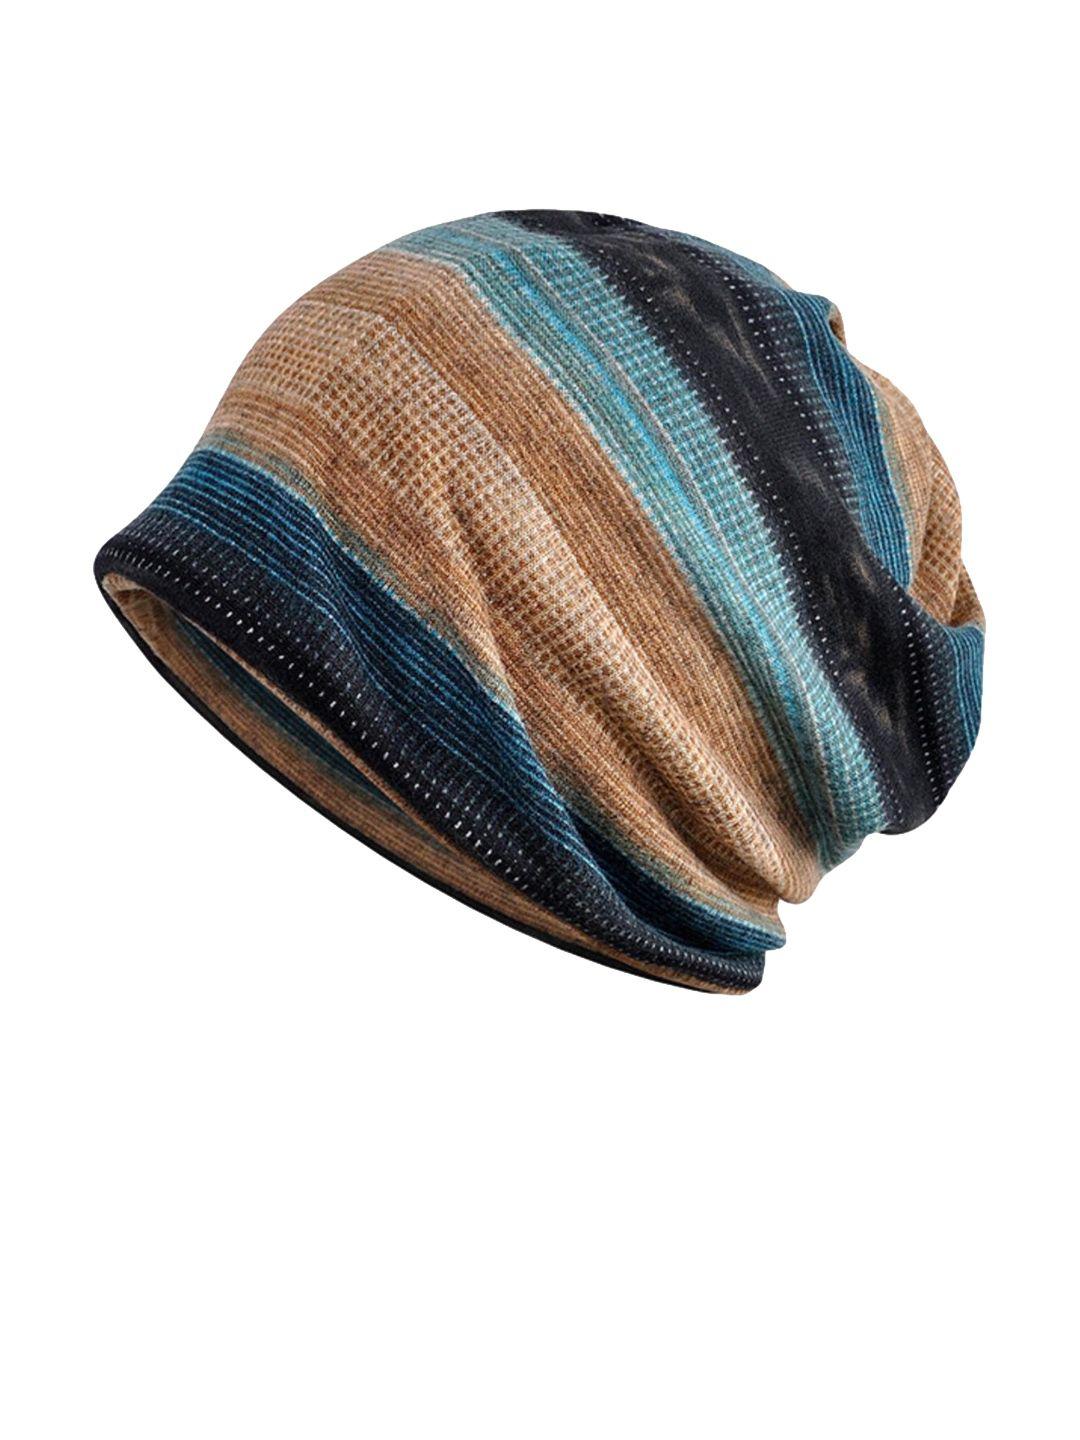 youstylo-unisex-green-&-brown-printed-beanie